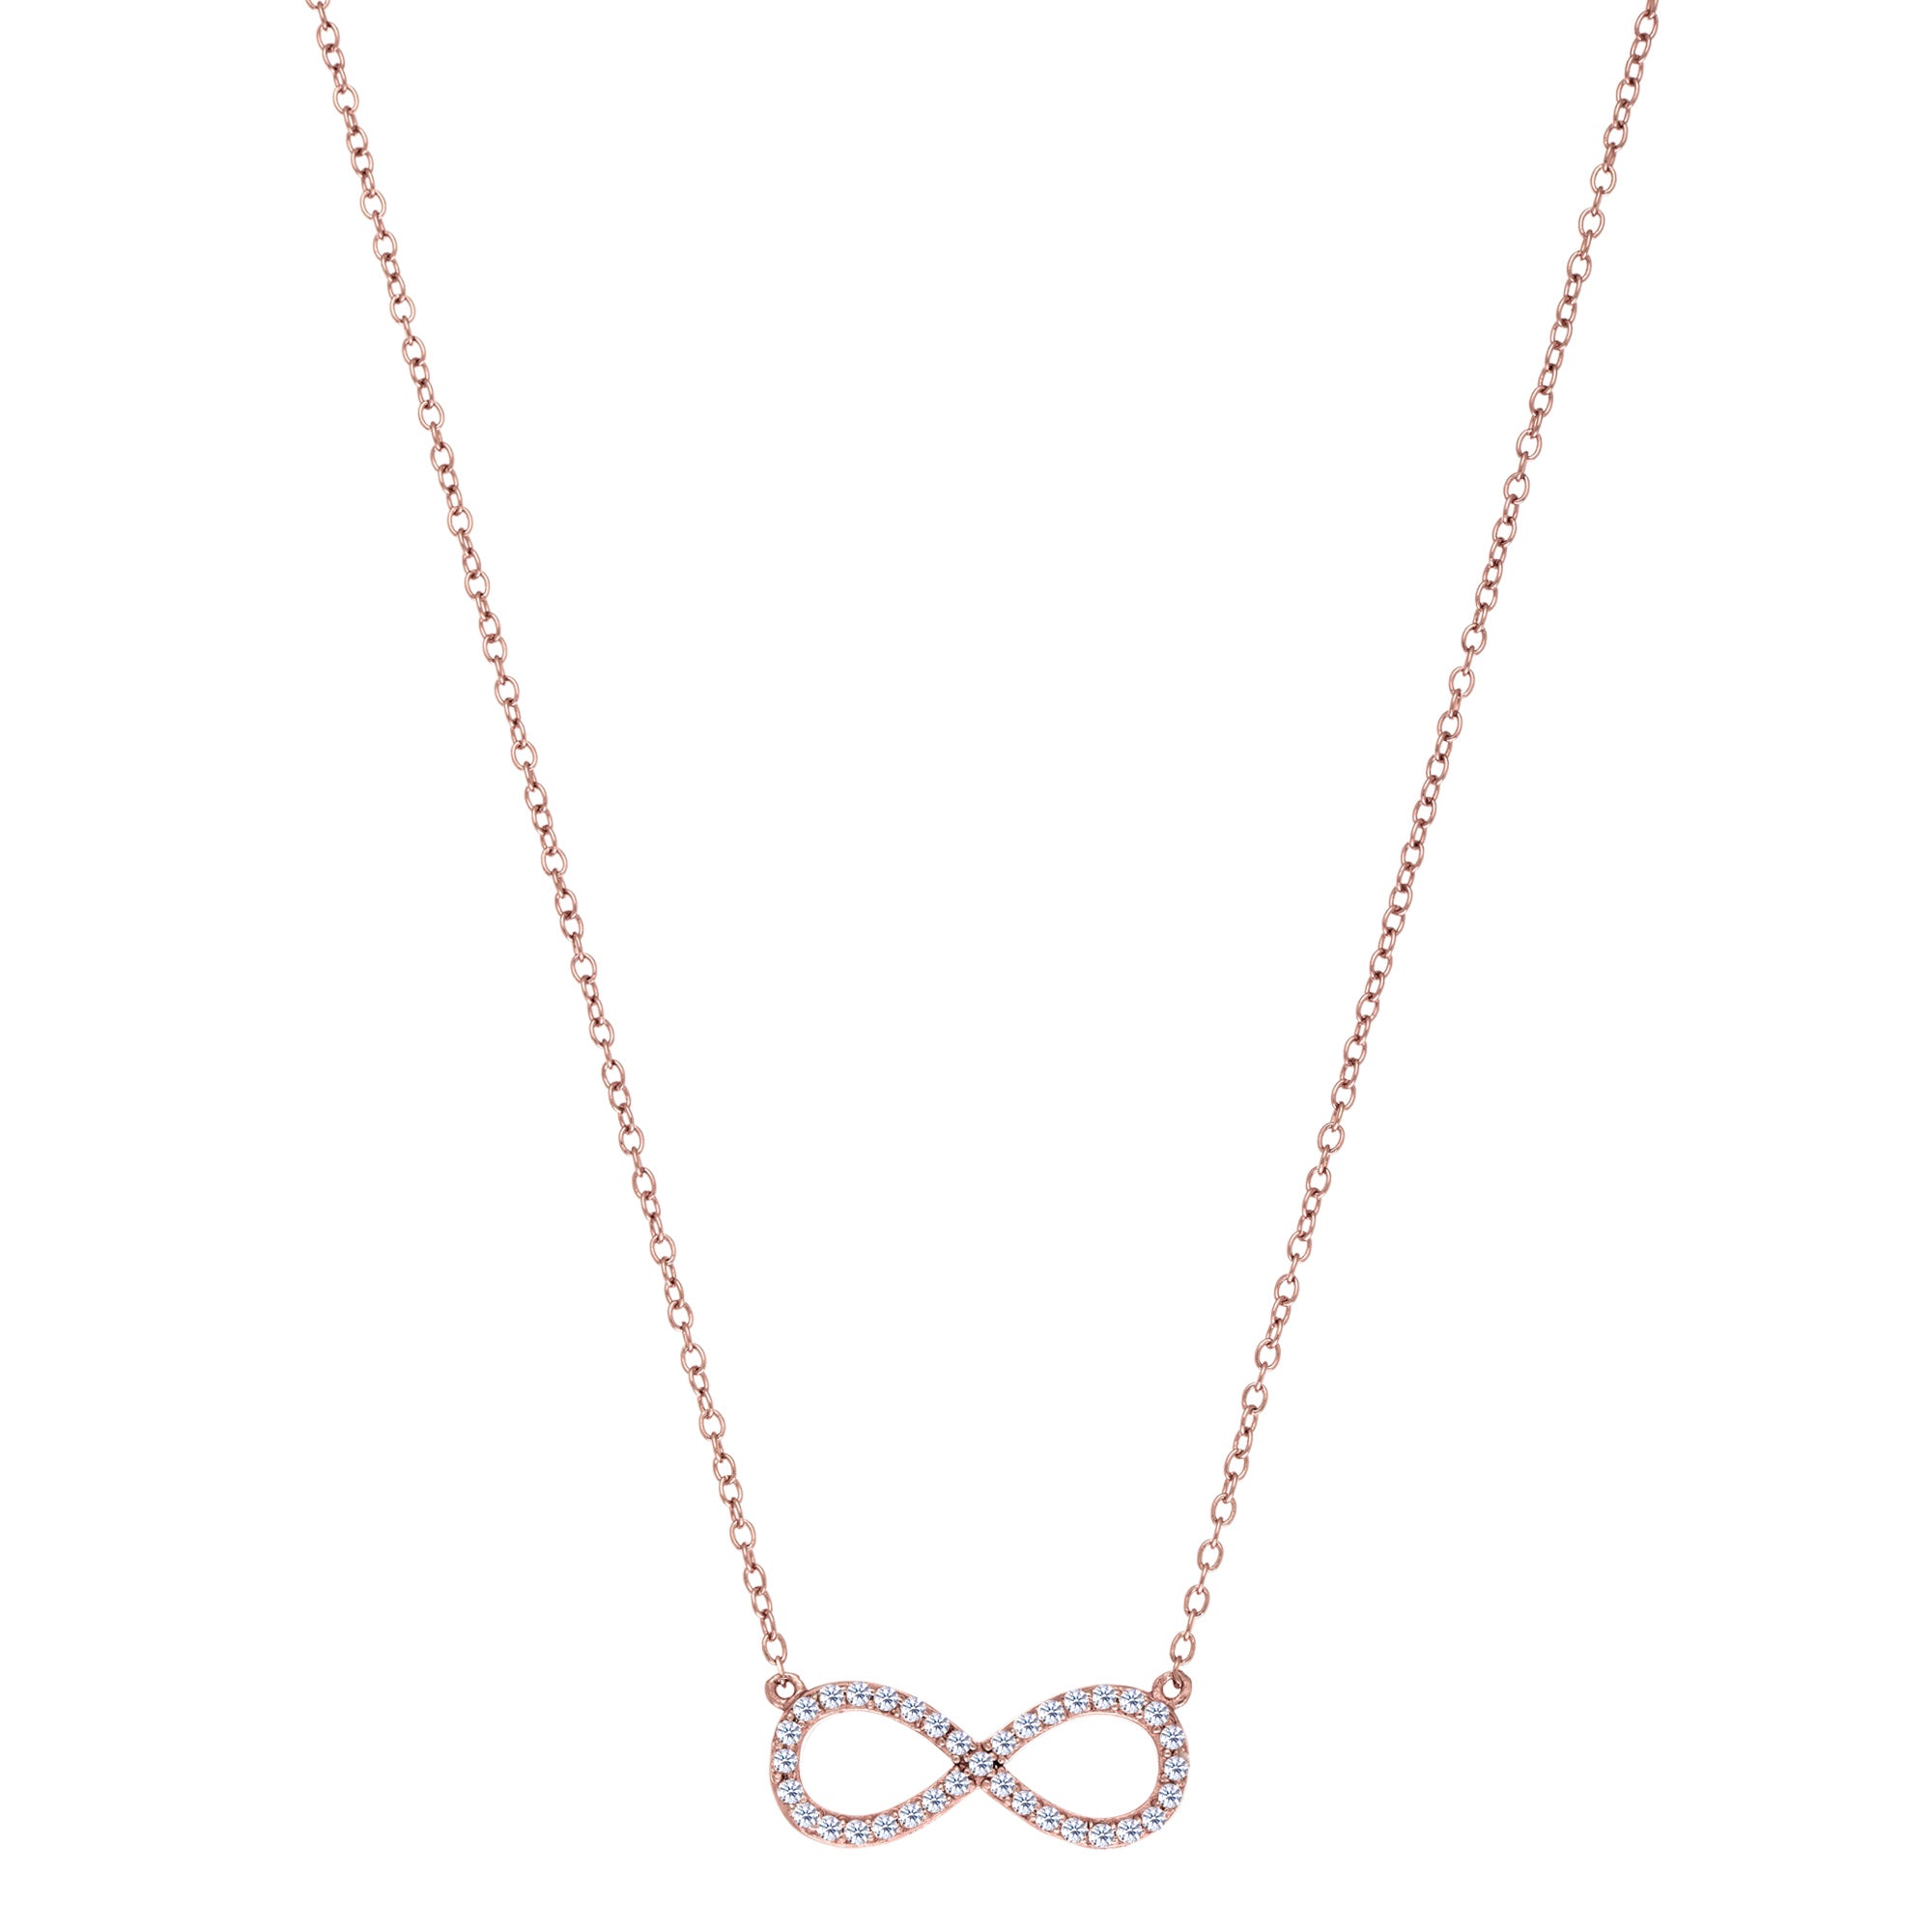 Infinity Sign Link And CZ Necklace In Rose Color Finish Sterling Silver, 18" fine designer jewelry for men and women